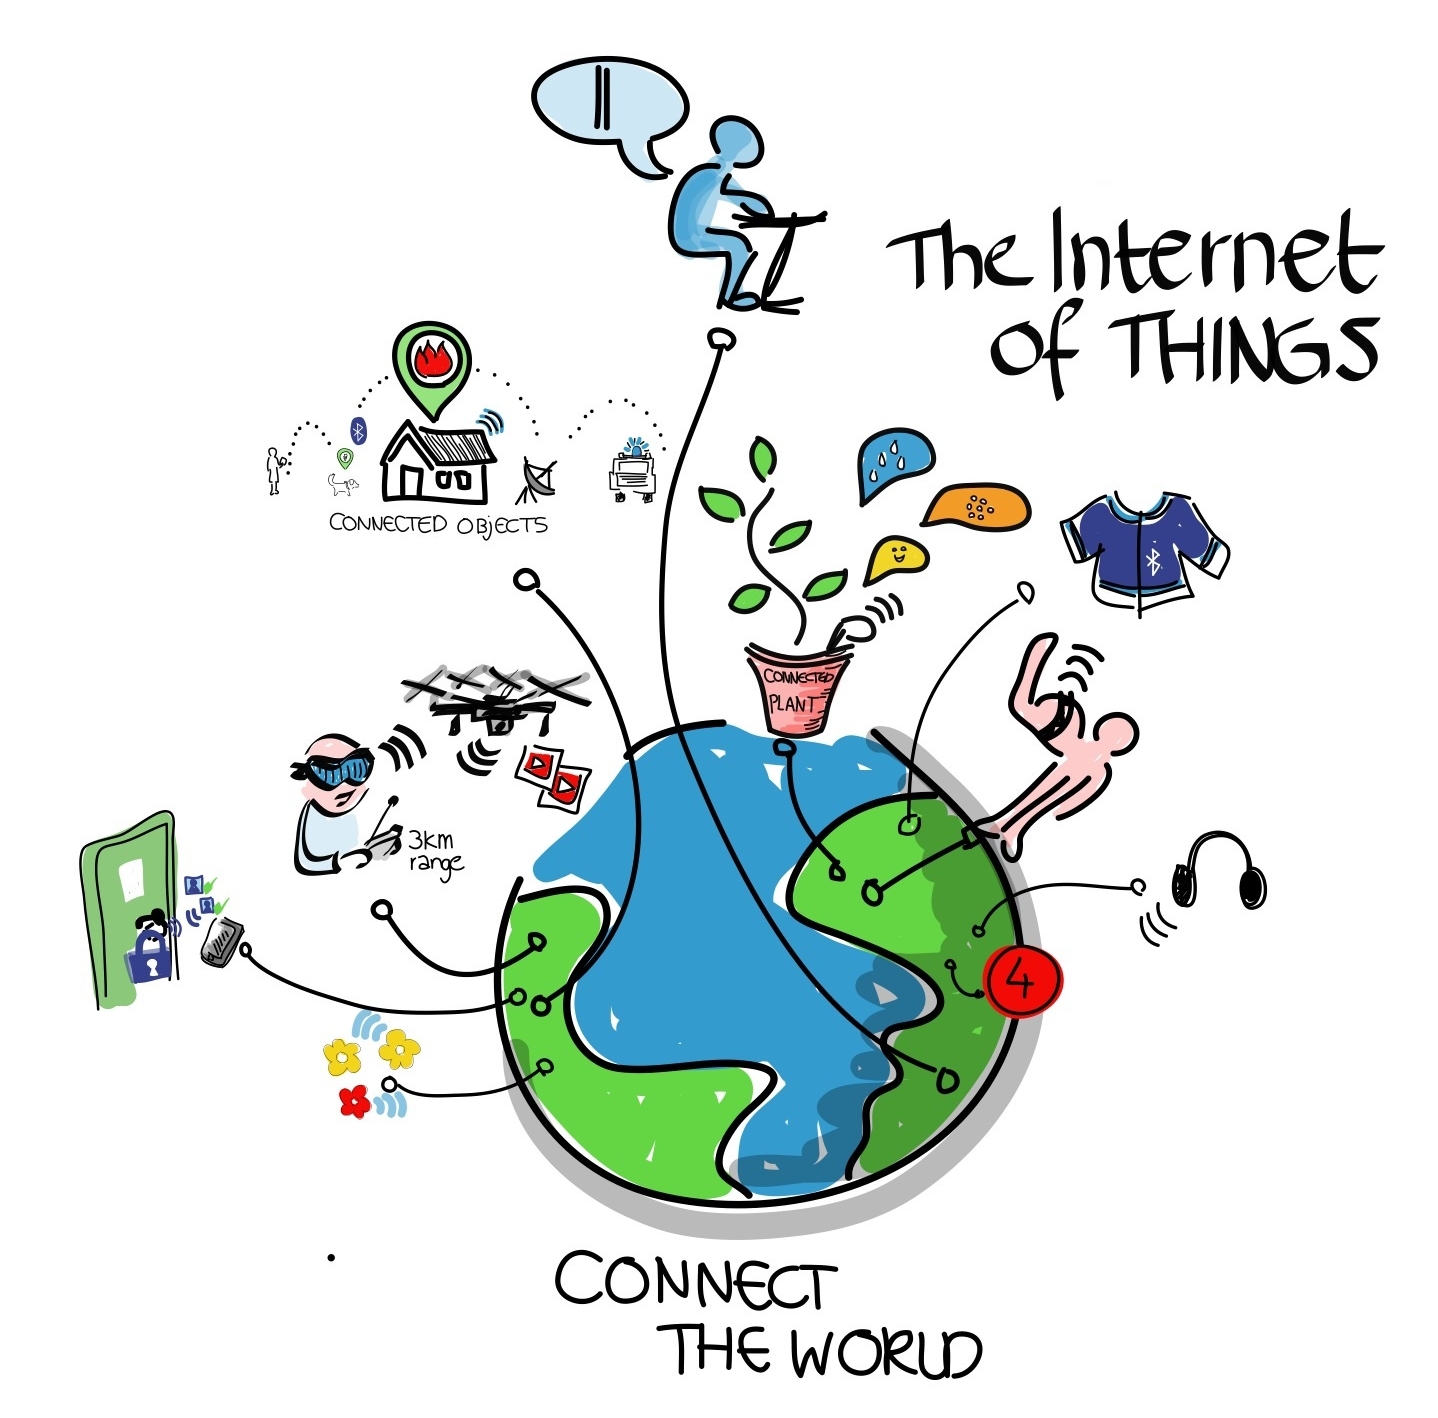 What Your Life Might Look Like In An IoT World